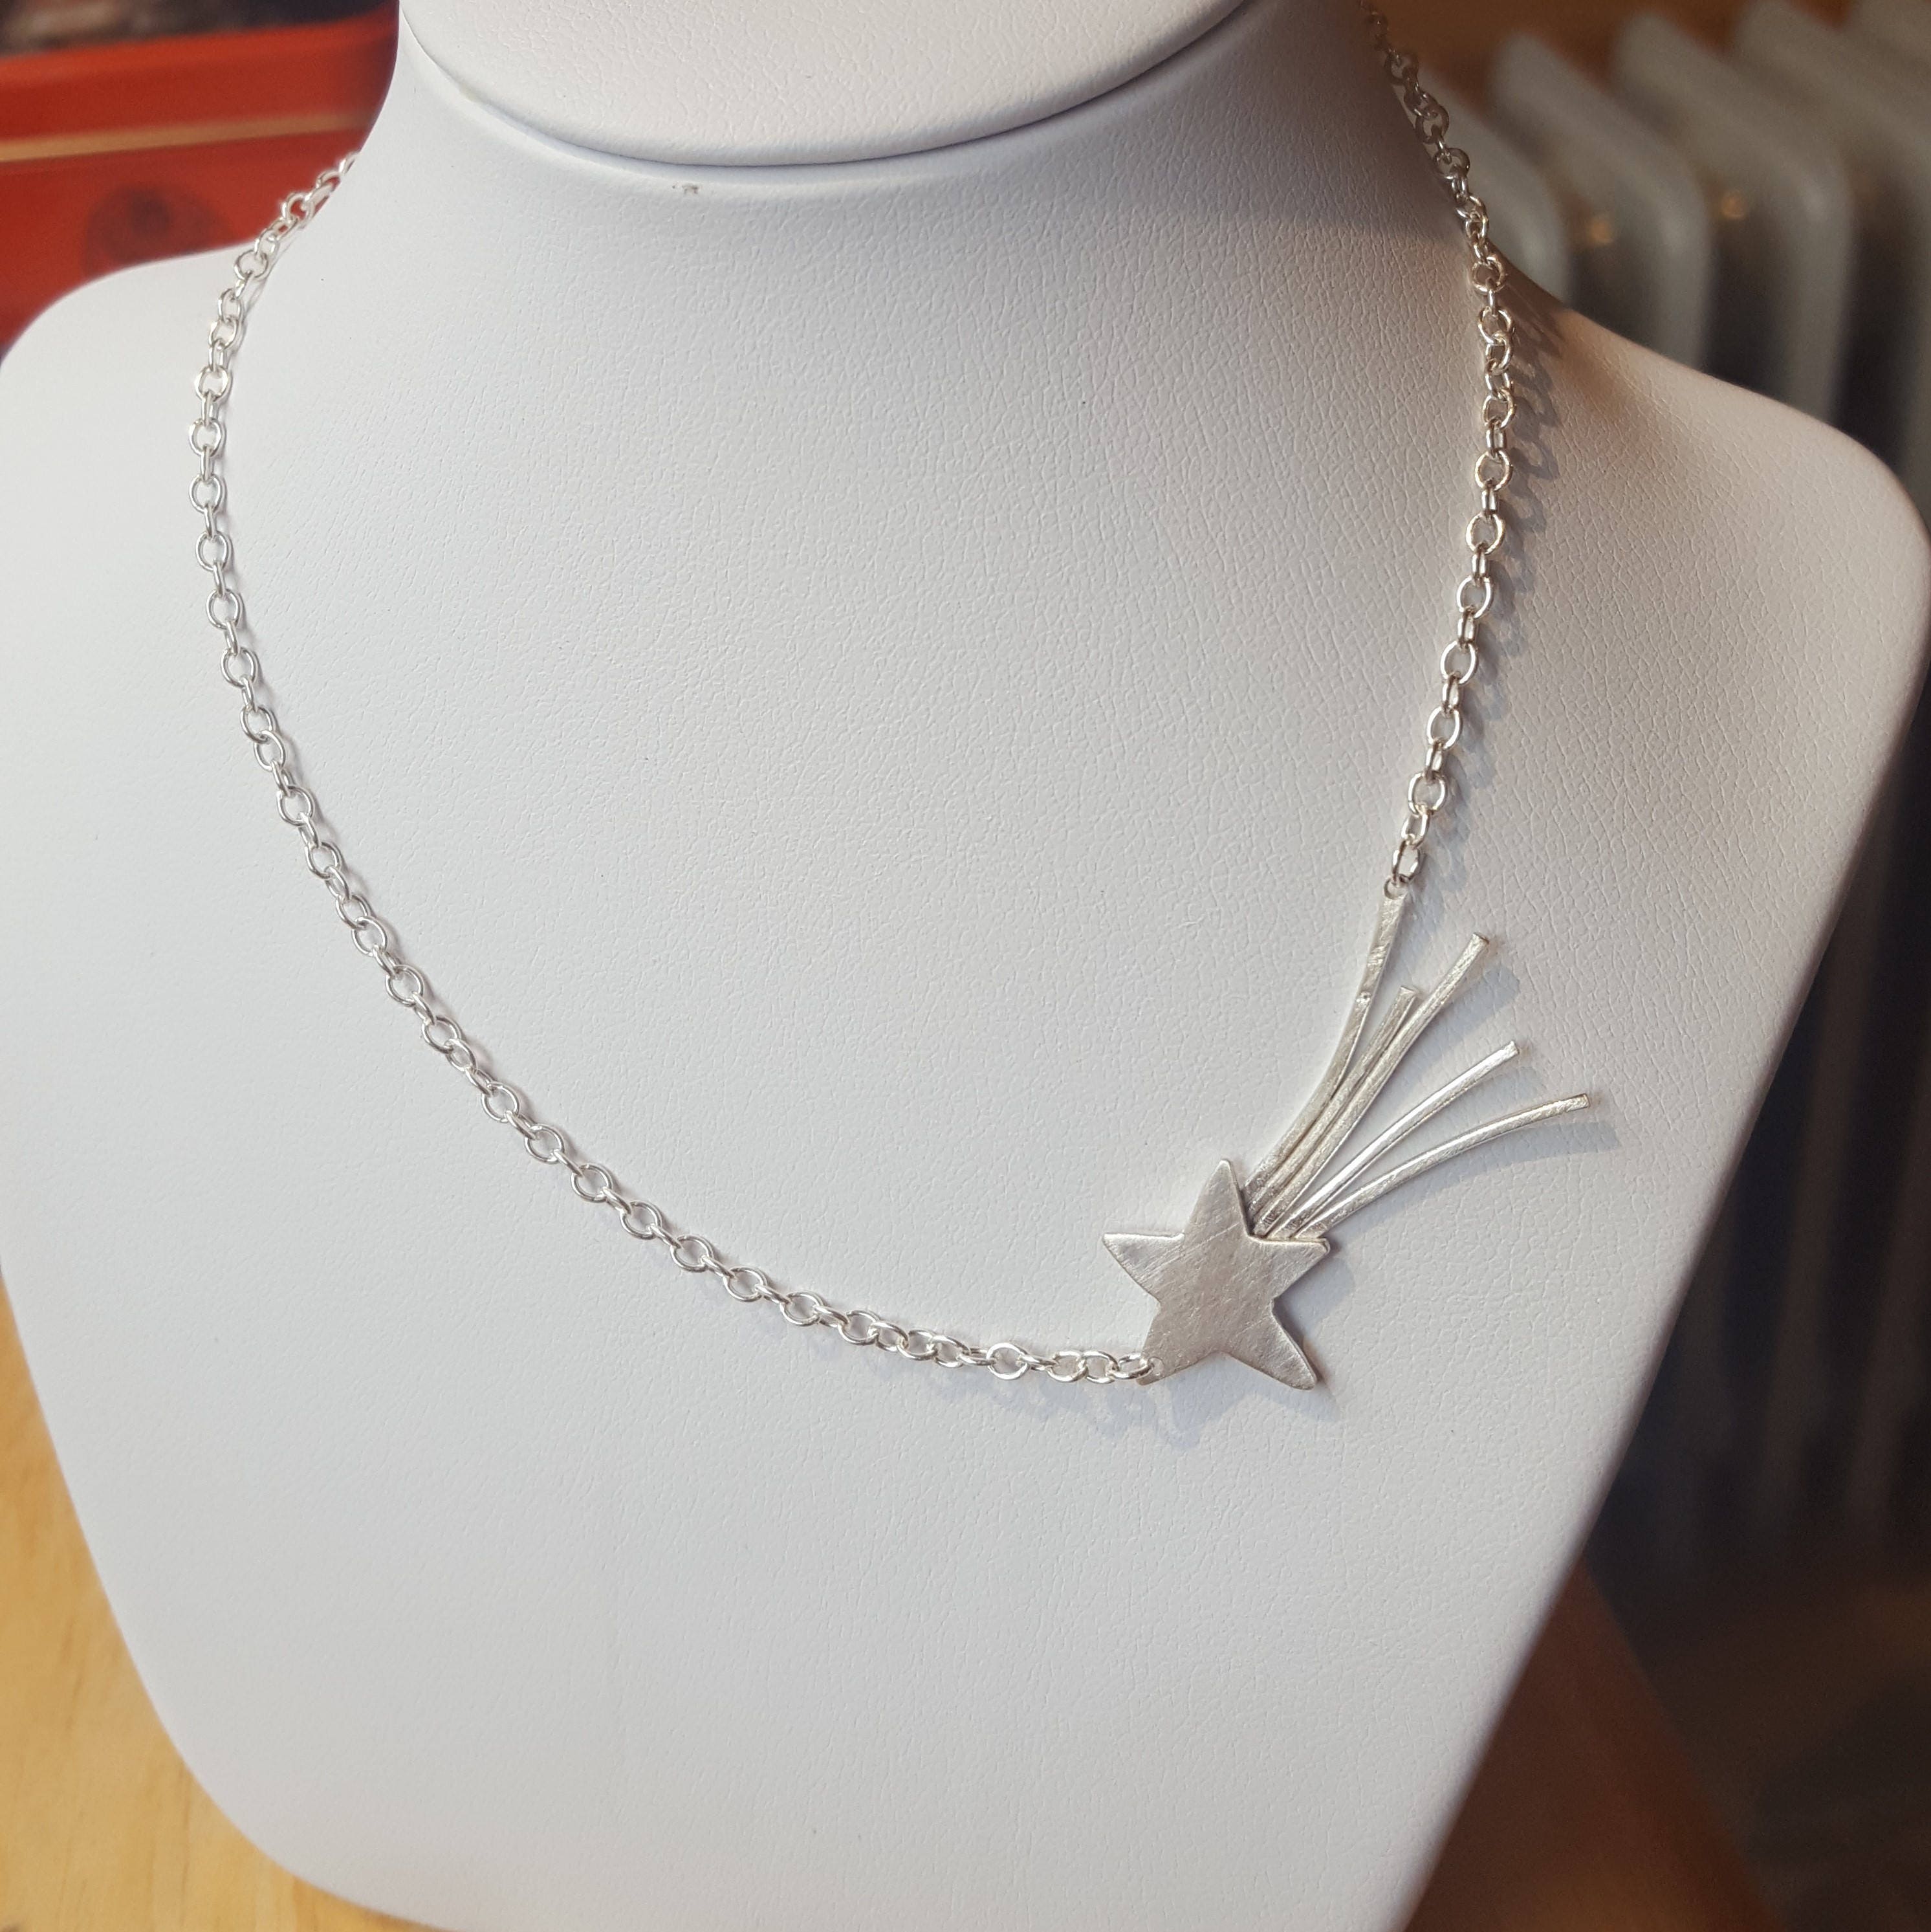 Buy Shooting Star Necklace, Sterling Silver Shooting Star Charm on a Silver  Cable Chain Online in India - Etsy